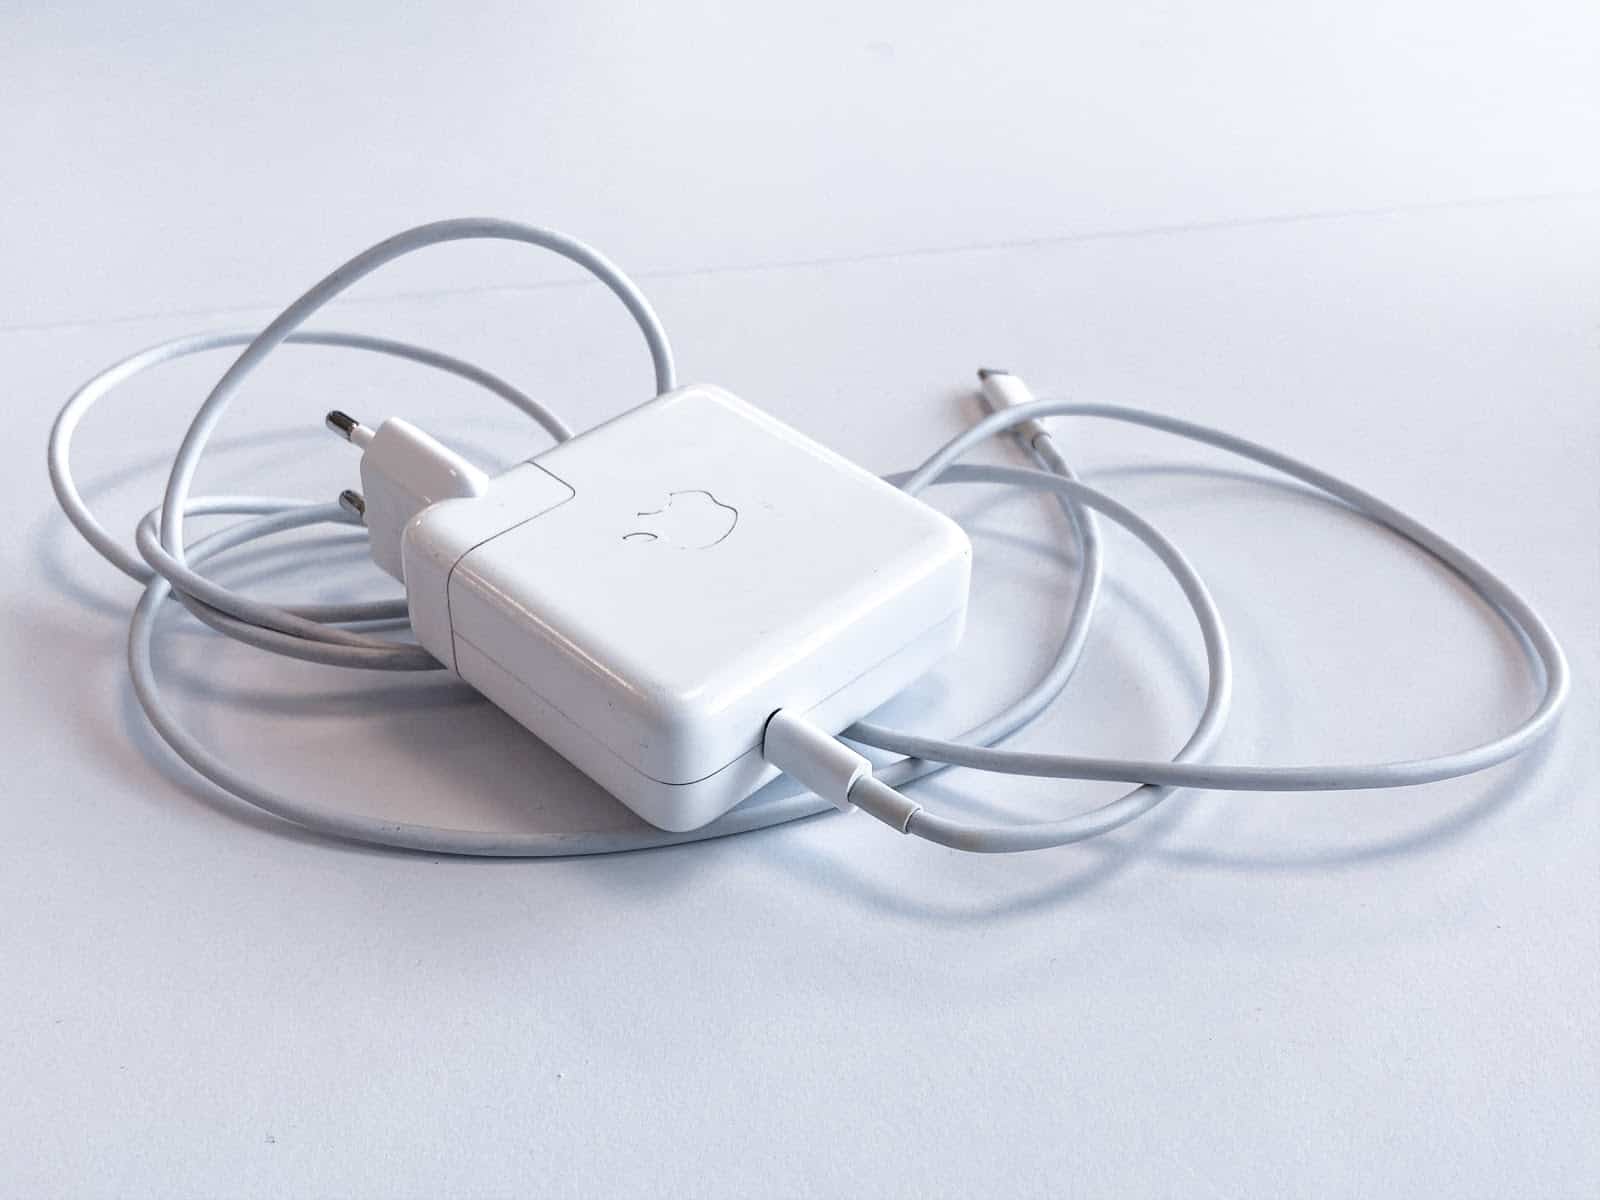 A white Apple laptop charger with cord curled up beneath it.